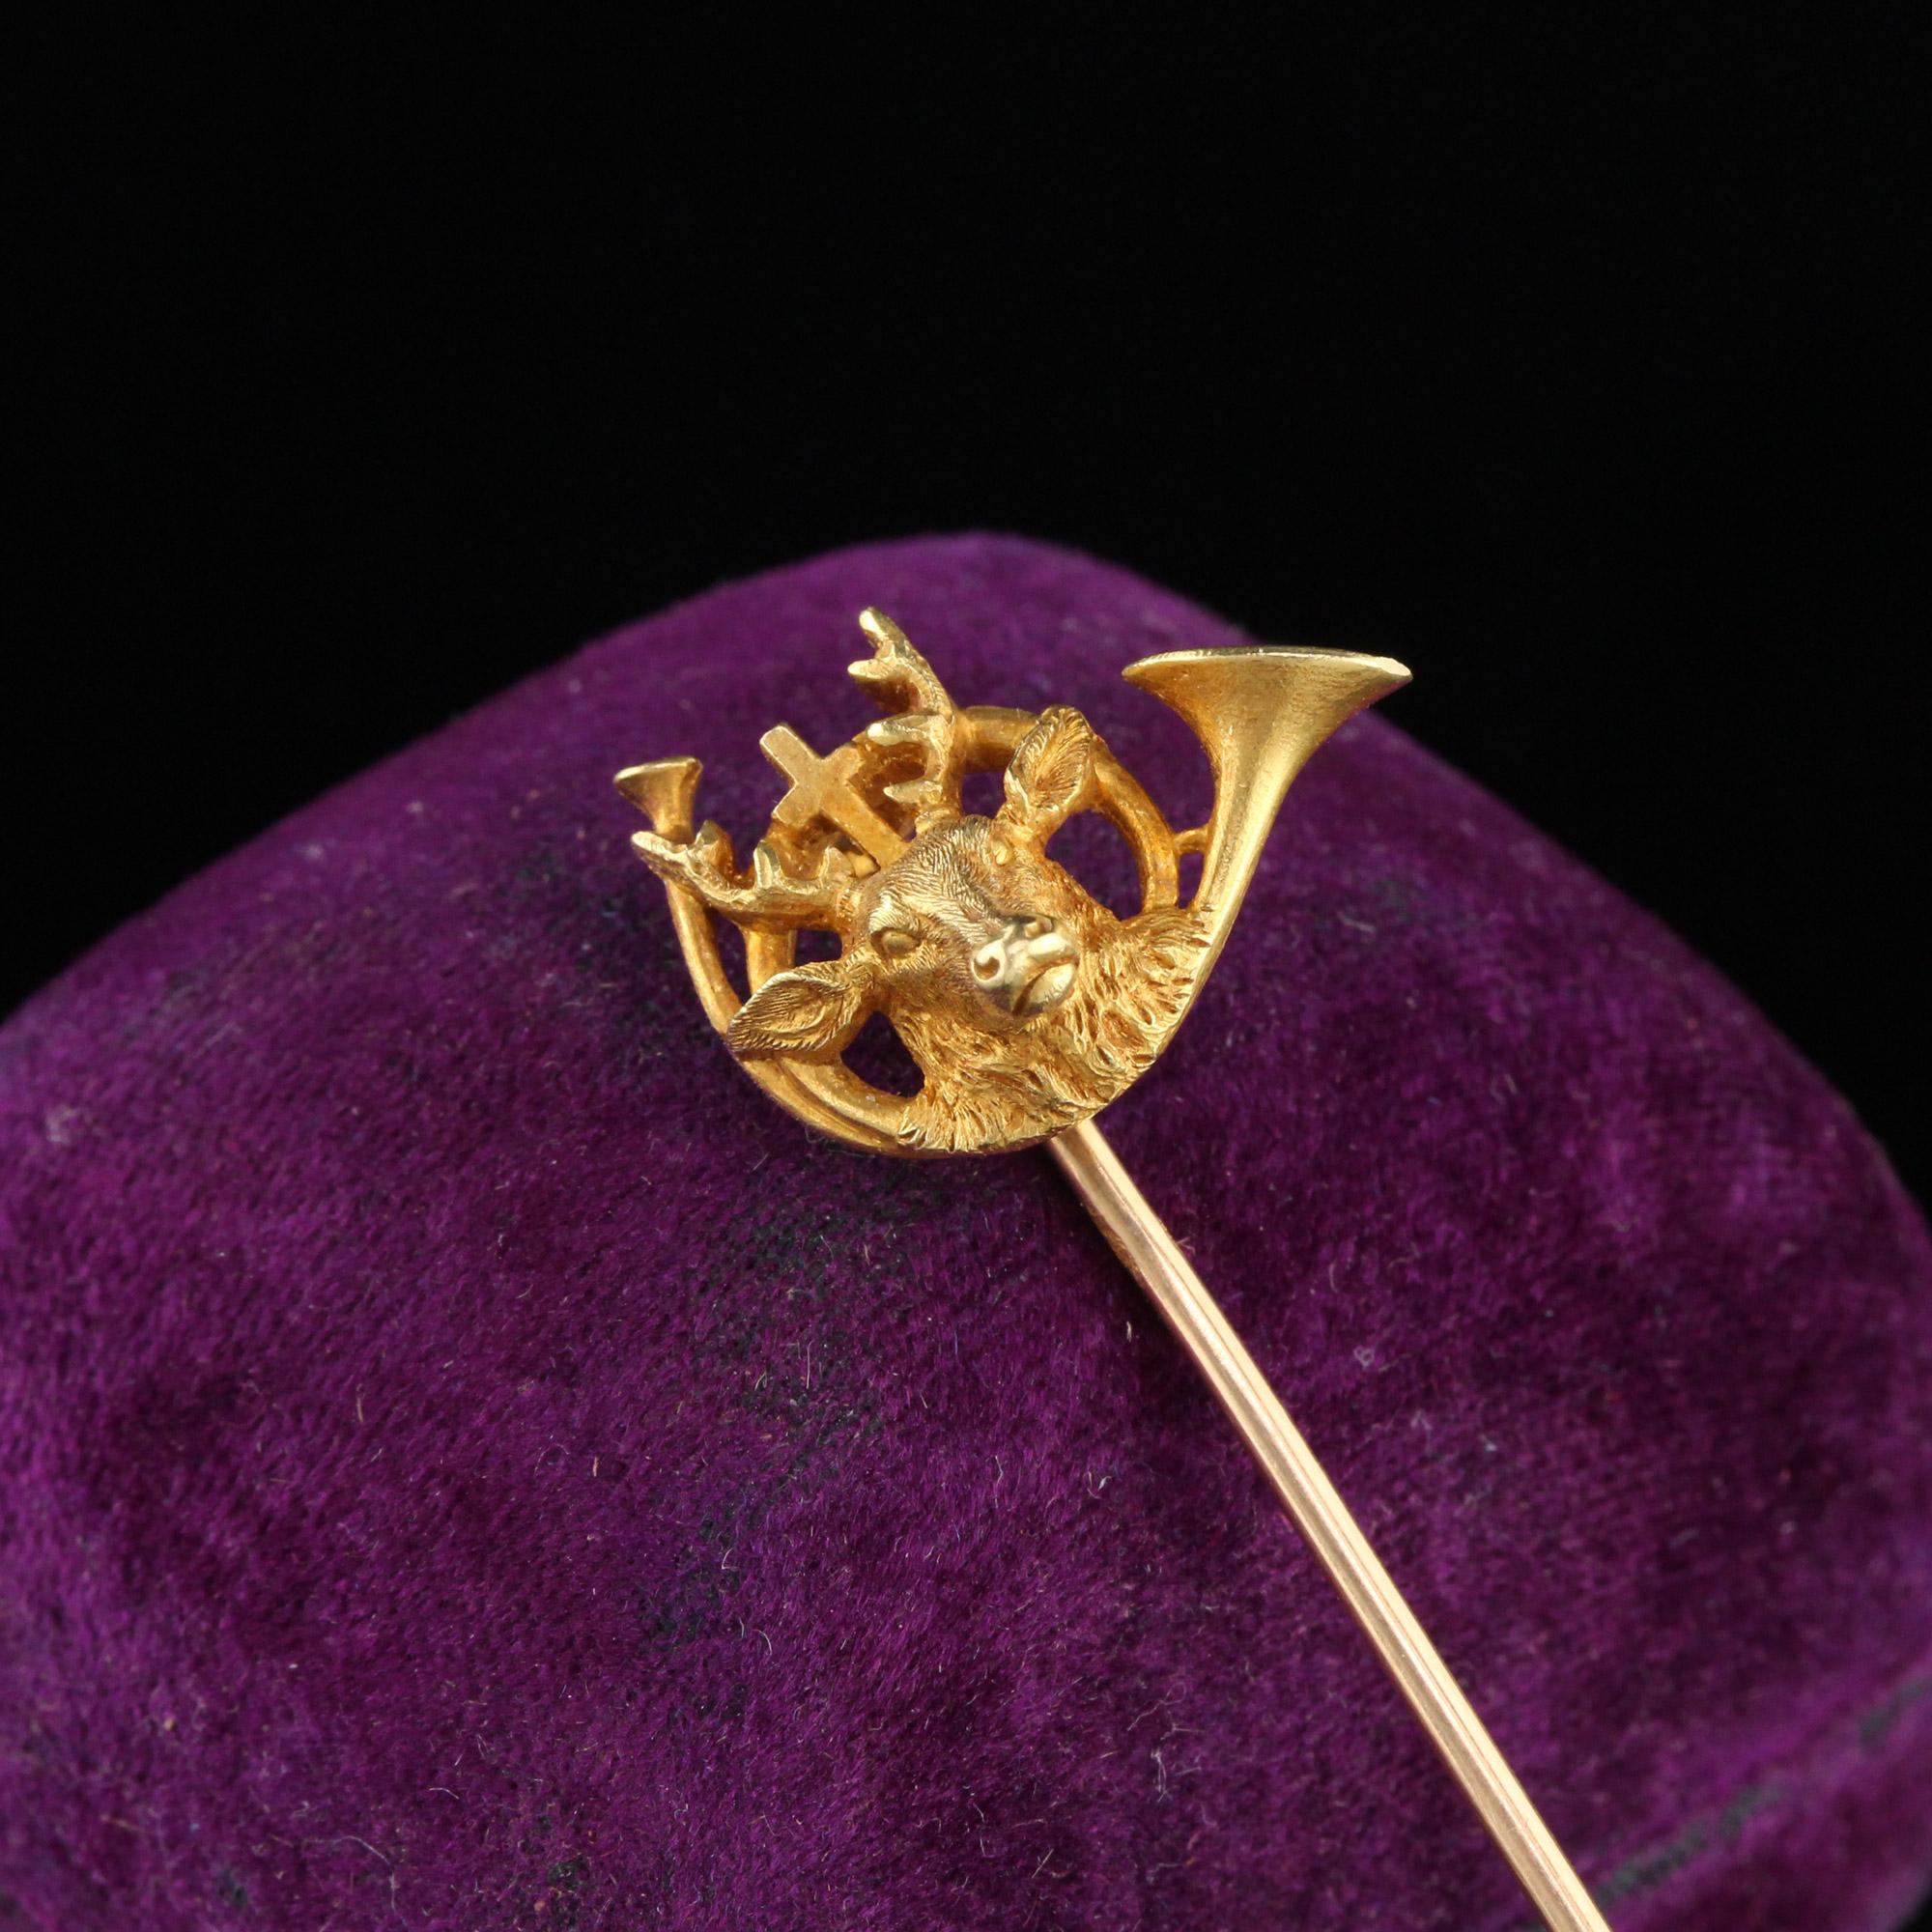 Beautiful French Art Nouveau stick pin made by Plisson Et Hartz. The stick pin is done in a rich 18K yellow gold. The deer has a cross above his head and a horn wrapping around his head.

Metal: 18K Yellow Gold 

Weight: 5.6 Grams

Measurements: